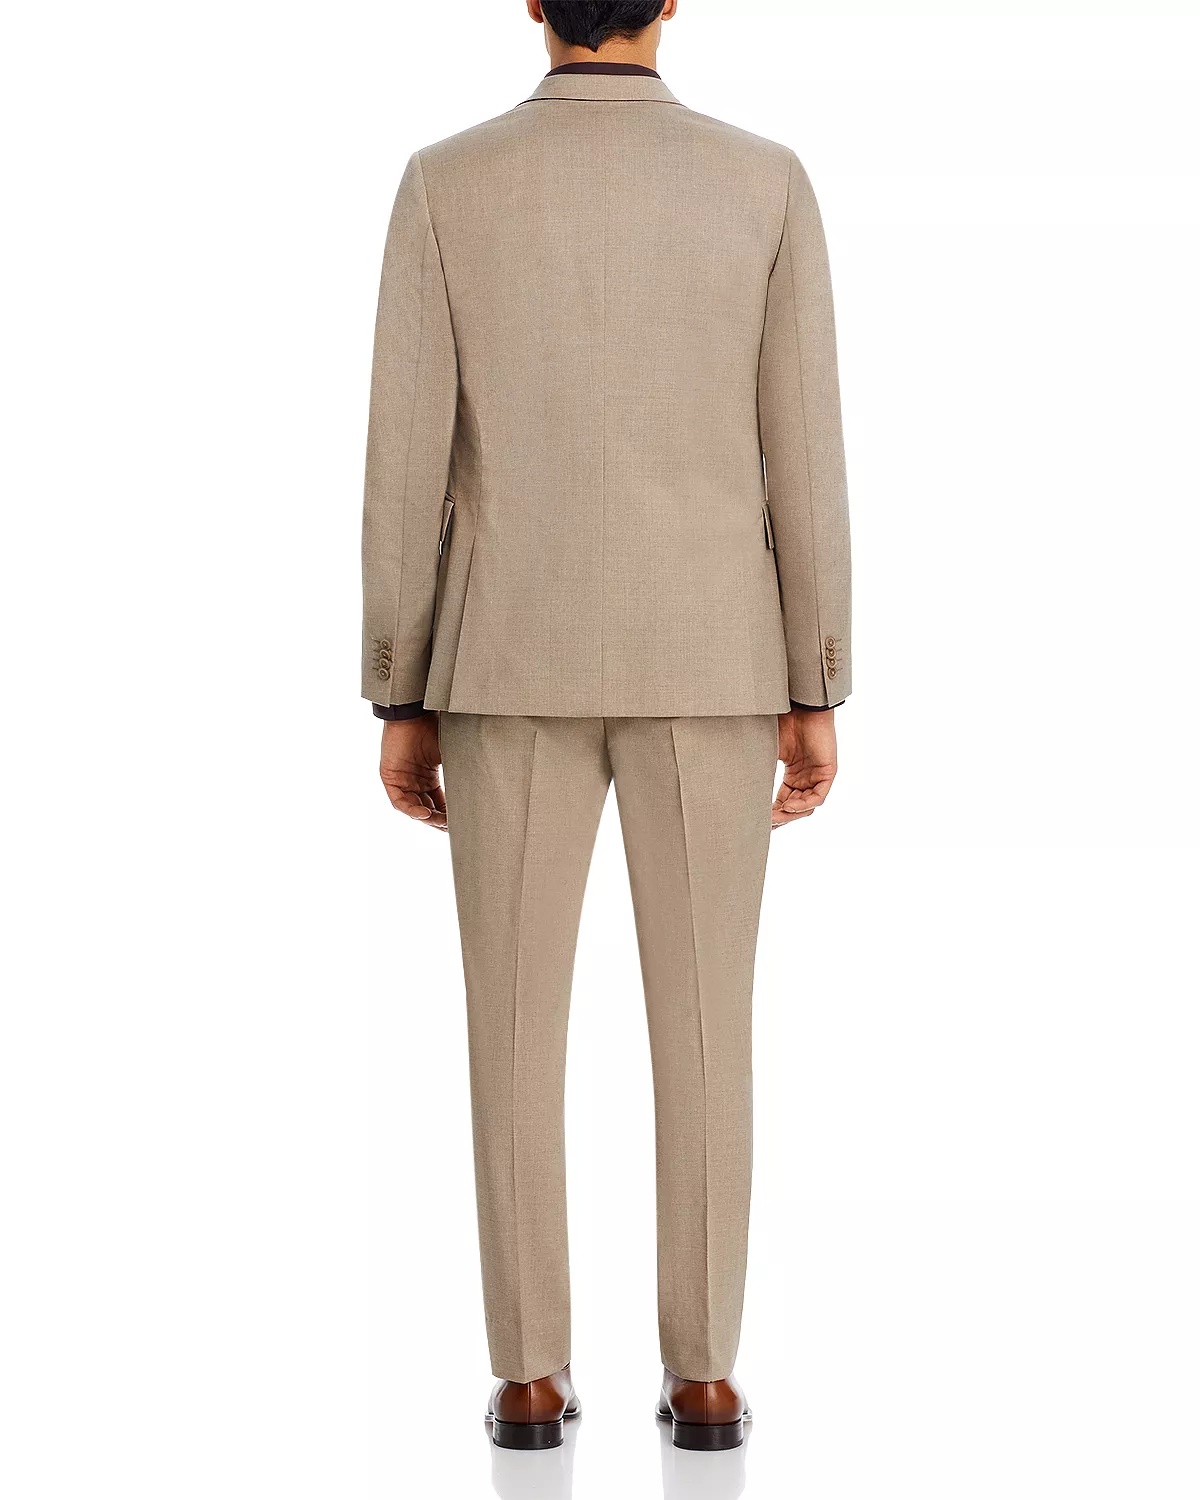 Brierly Tailored Fit Suit - 4